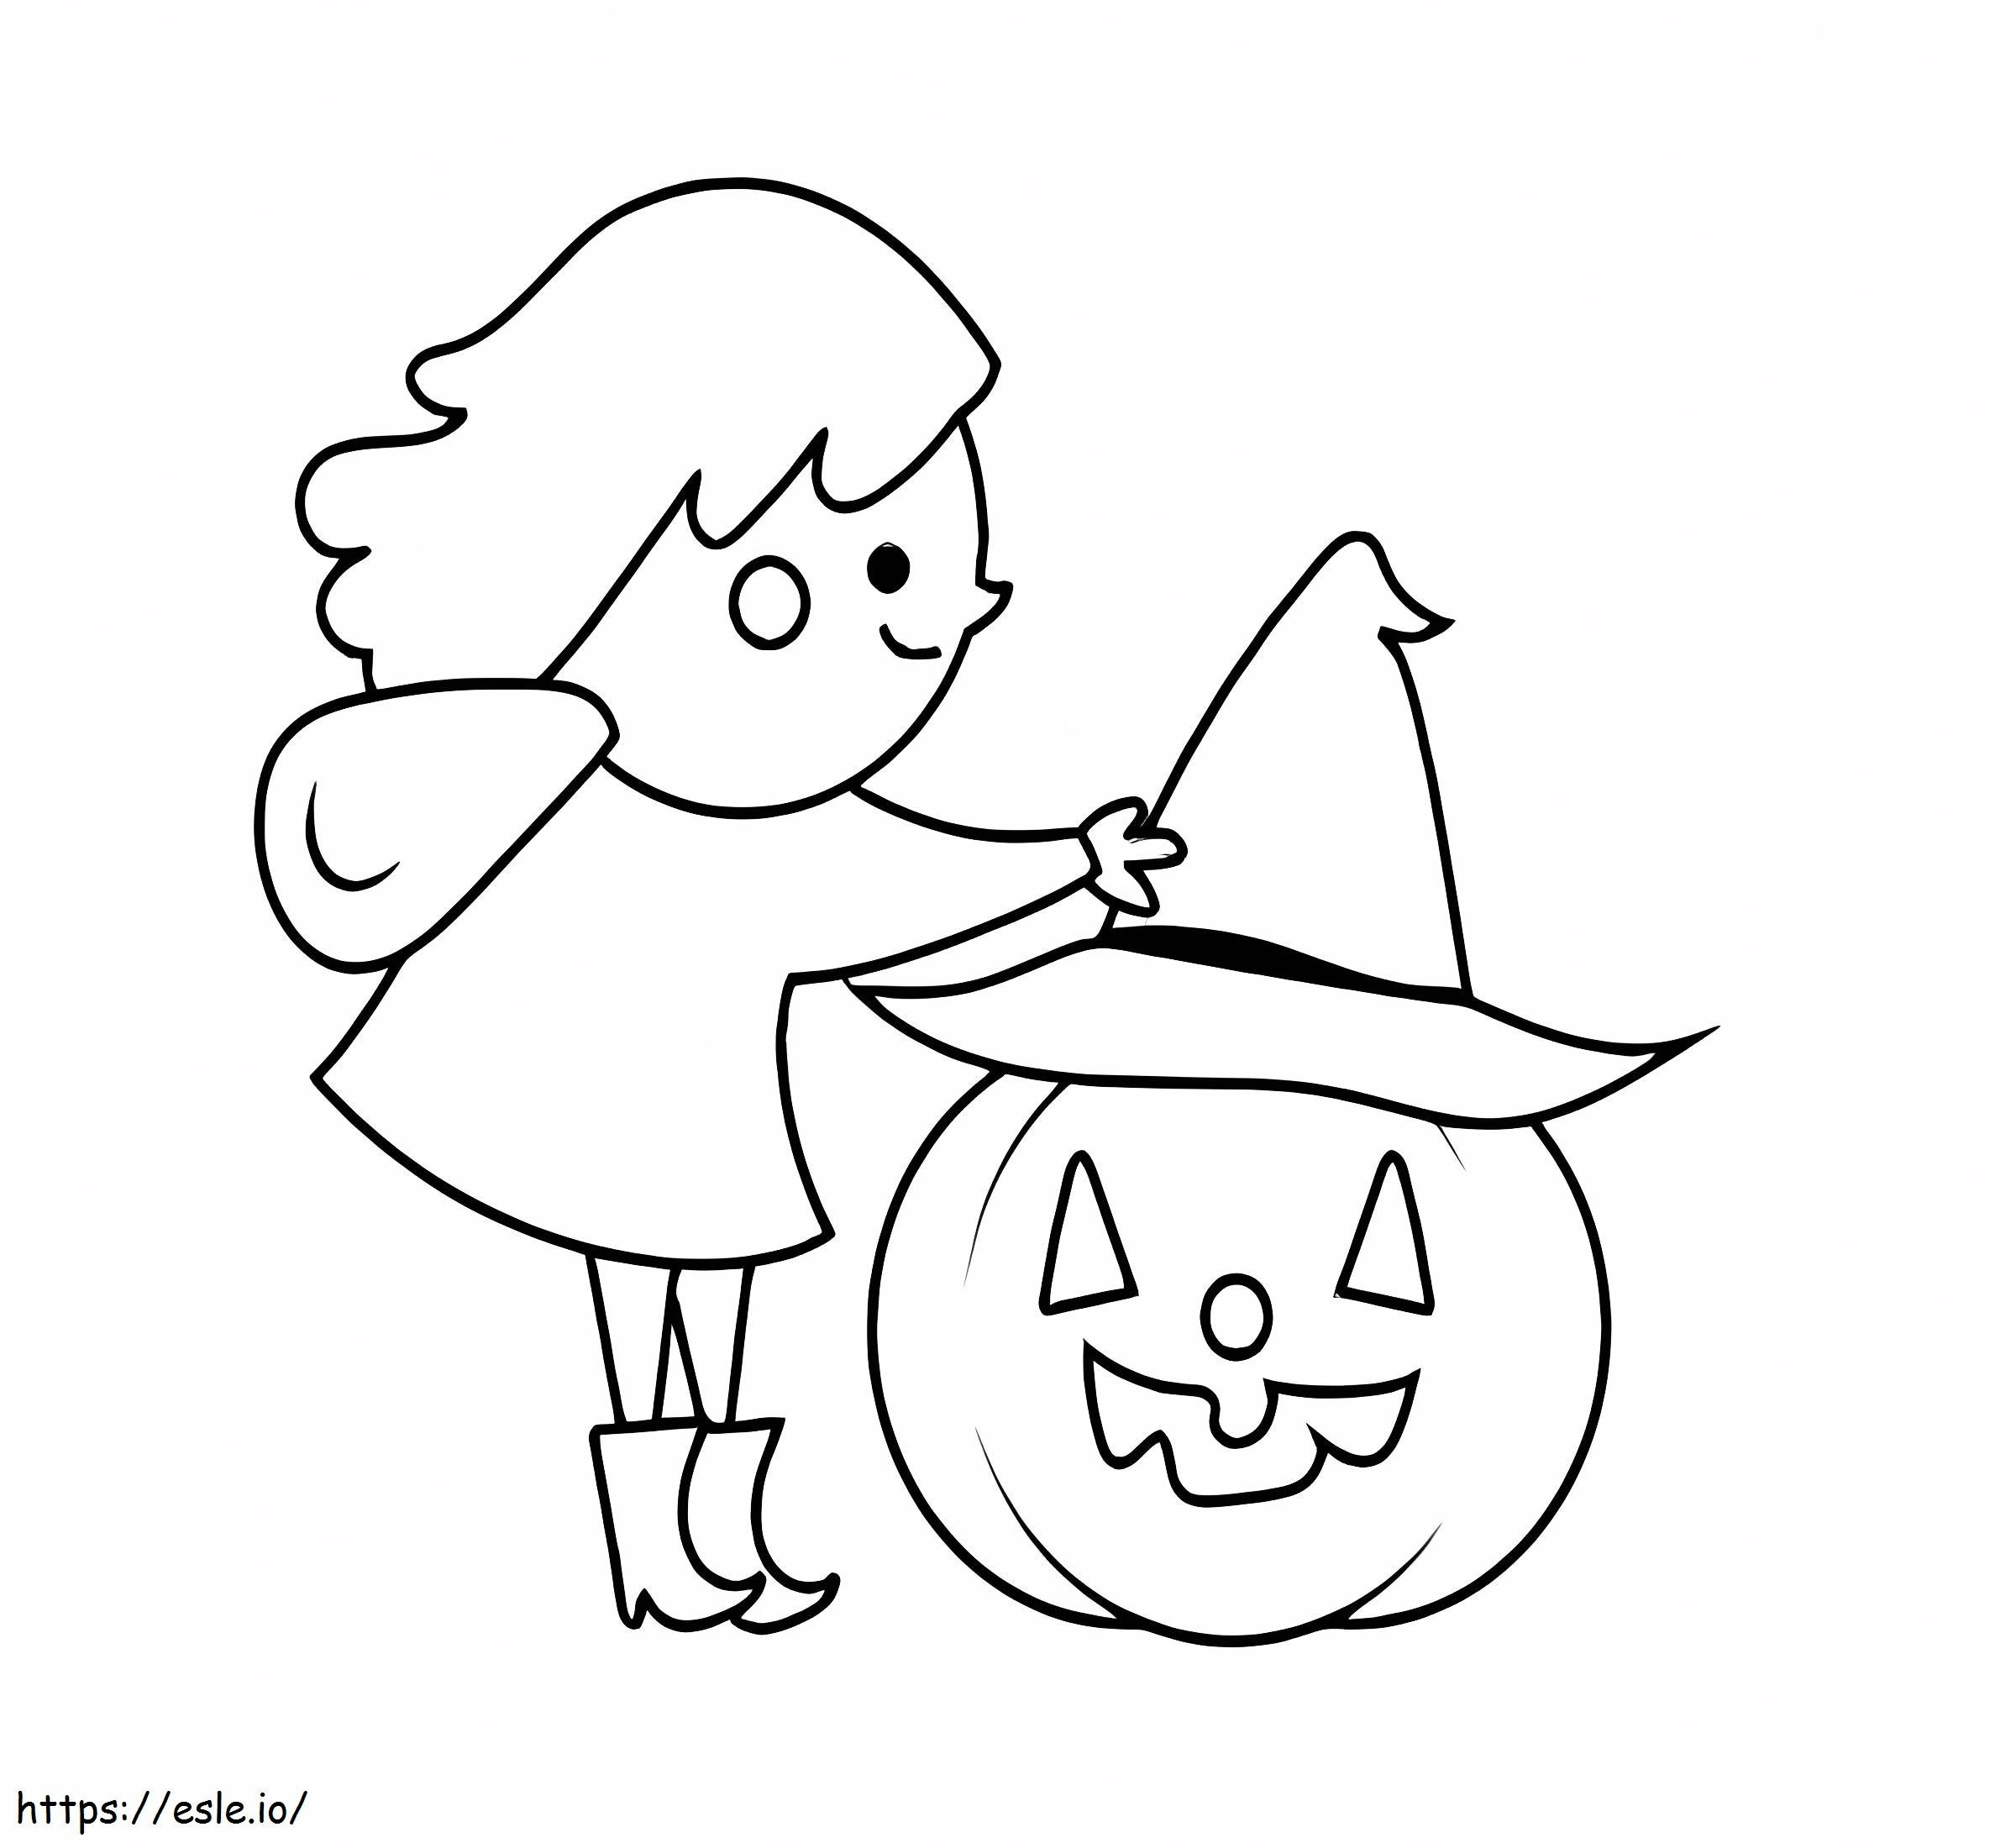 Jack O Lantern With A Girl coloring page